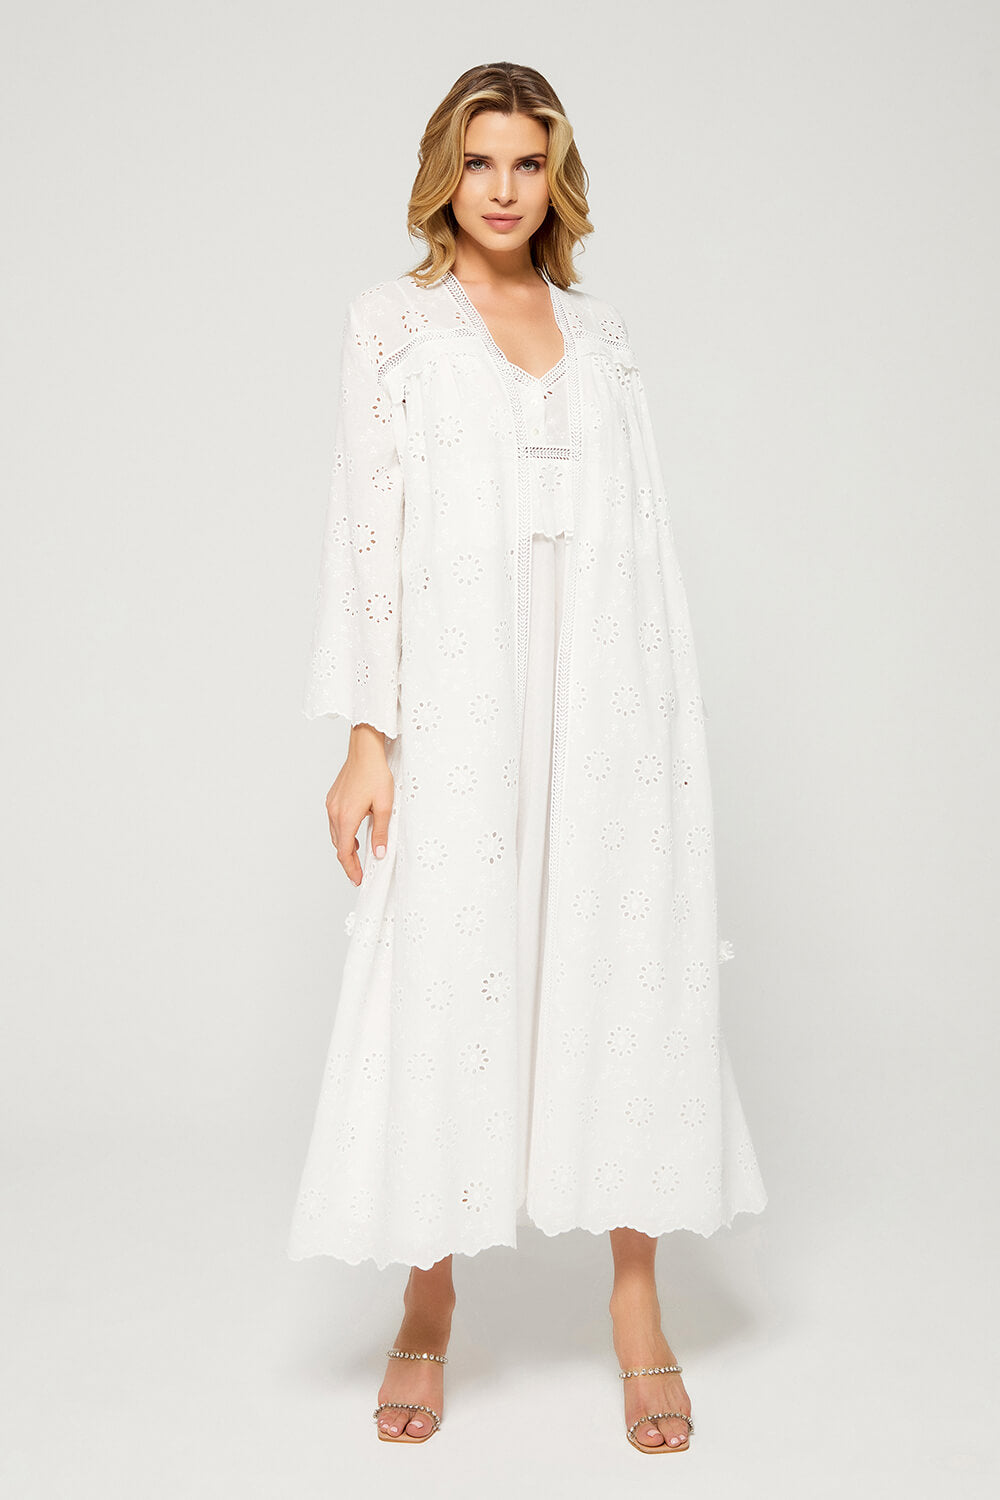 Lyra - Long Cotton Trimmed Robe Set with Buttons